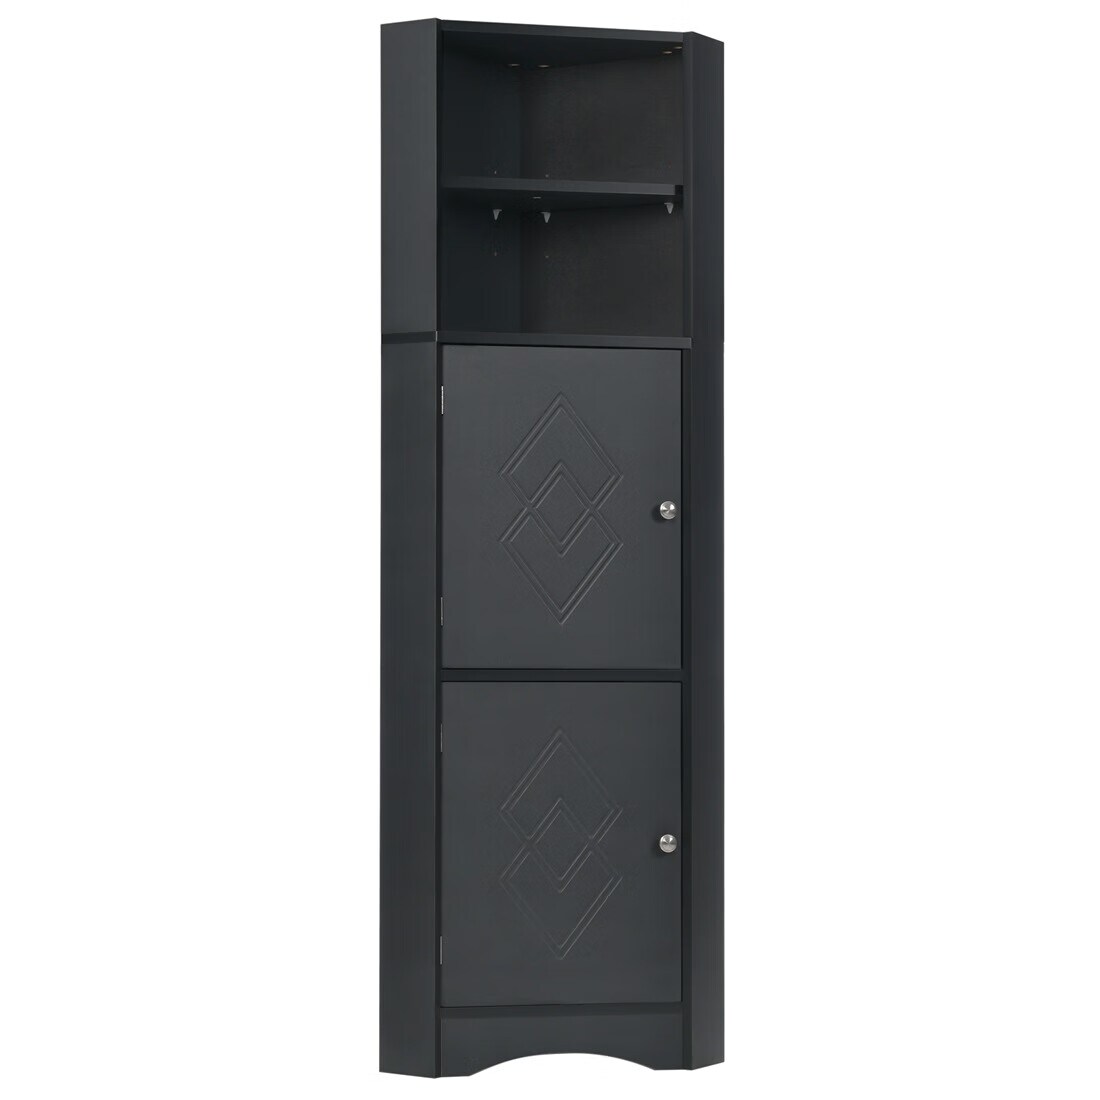 https://ak1.ostkcdn.com/images/products/is/images/direct/b9901af5f8dac25a8d2efffb75b2fb744f3b97d7/Merax-Freestanding-Tall-Bathroom-Corner-Cabinet-with-Adjustable-Shelves.jpg